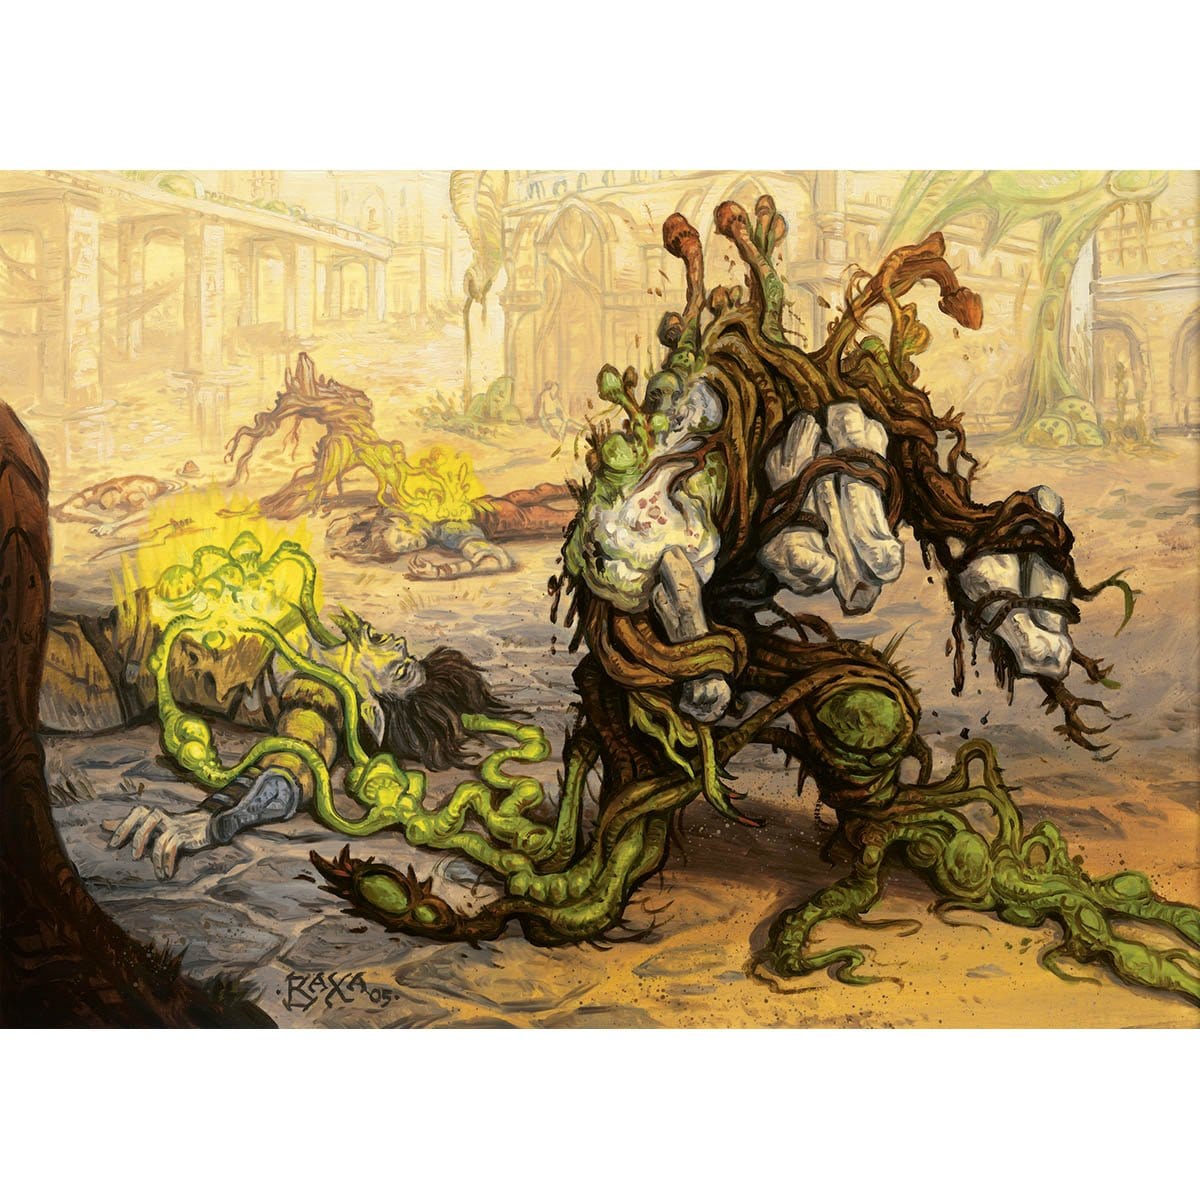 Golgari Germination Print - Print - Original Magic Art - Accessories for Magic the Gathering and other card games